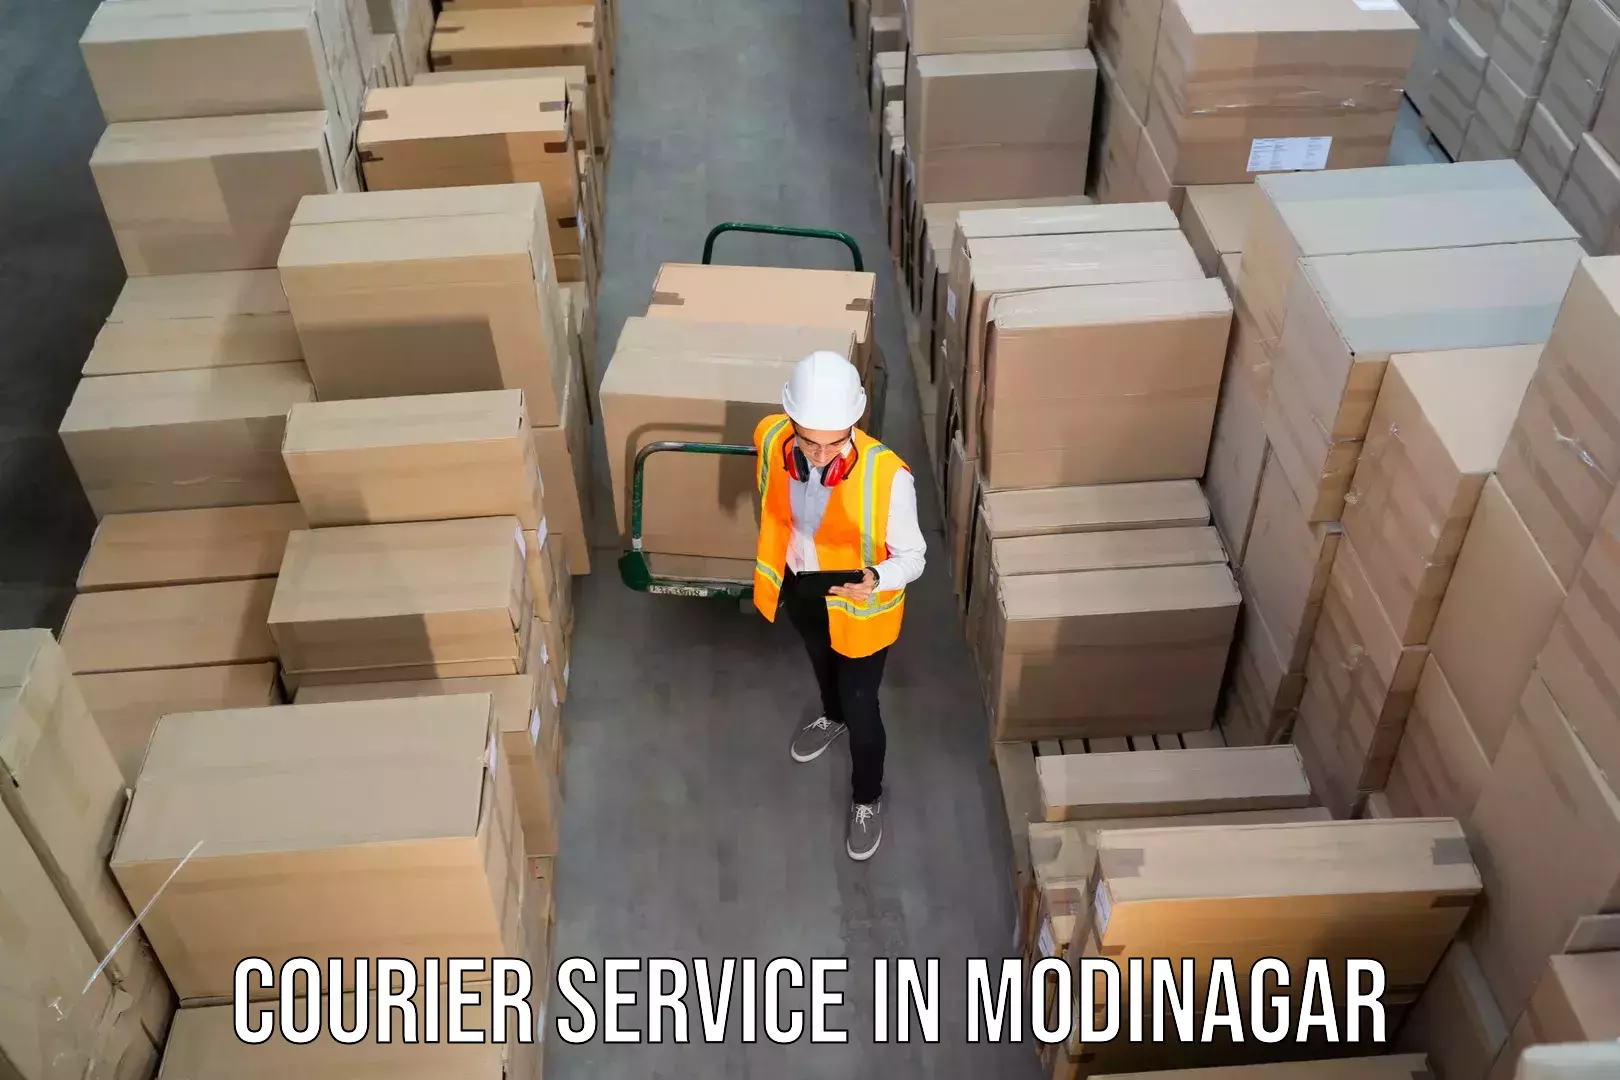 Overnight delivery services in Modinagar